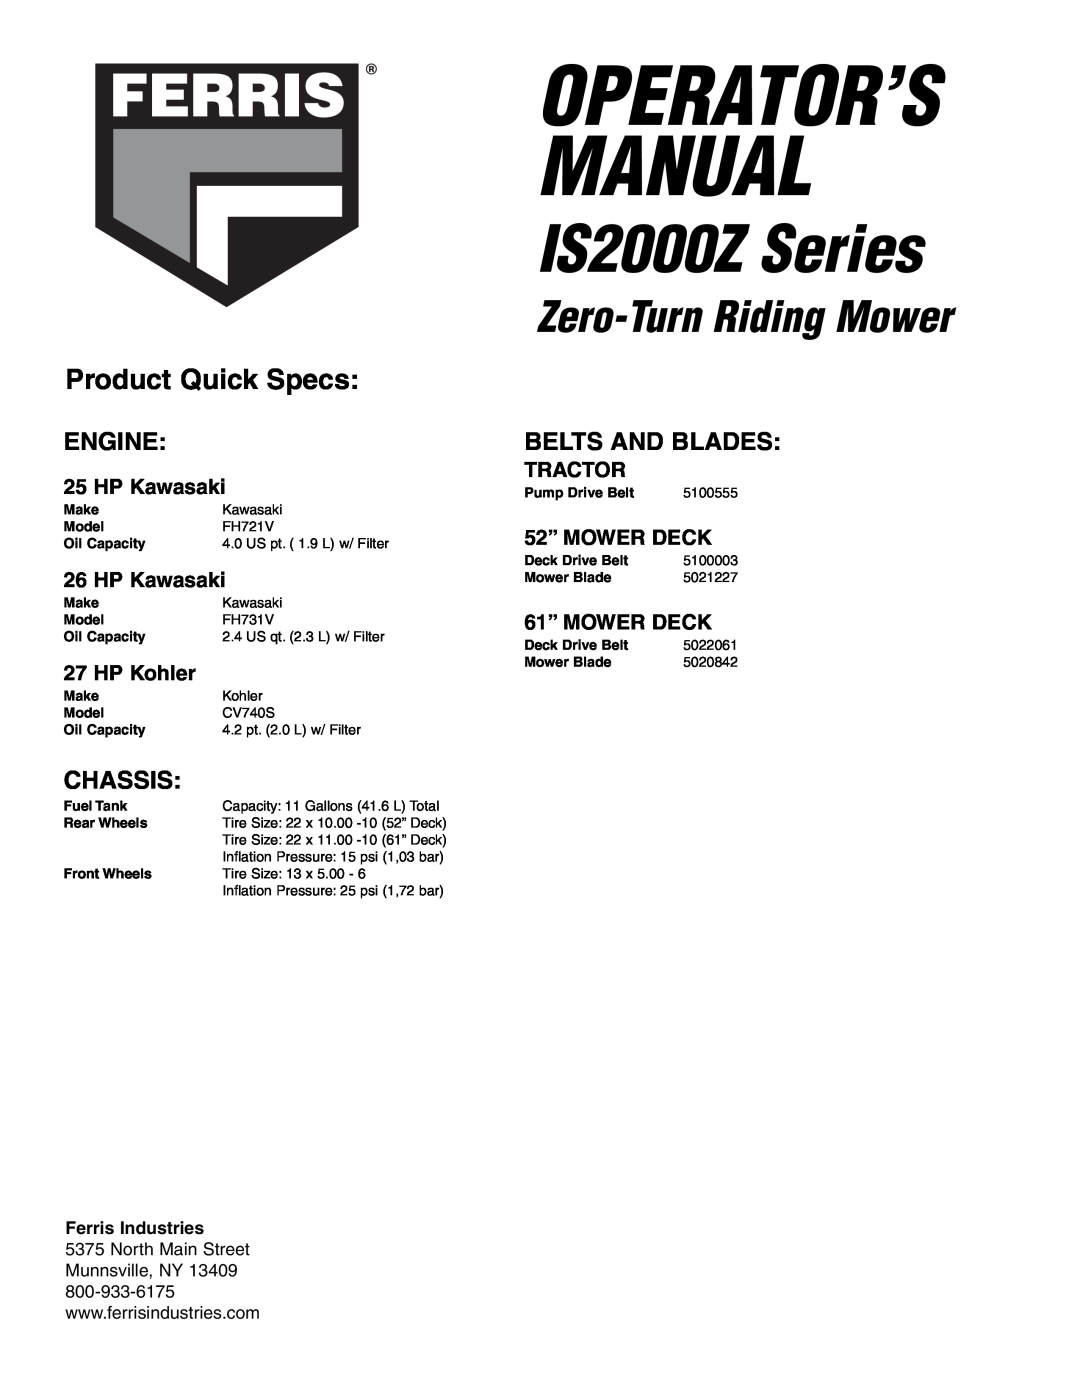 Ferris Industries 5900625 Product Quick Specs, Belts And Blades, IS2000Z Series, Operator’S Manual, Zero-Turn Riding Mower 